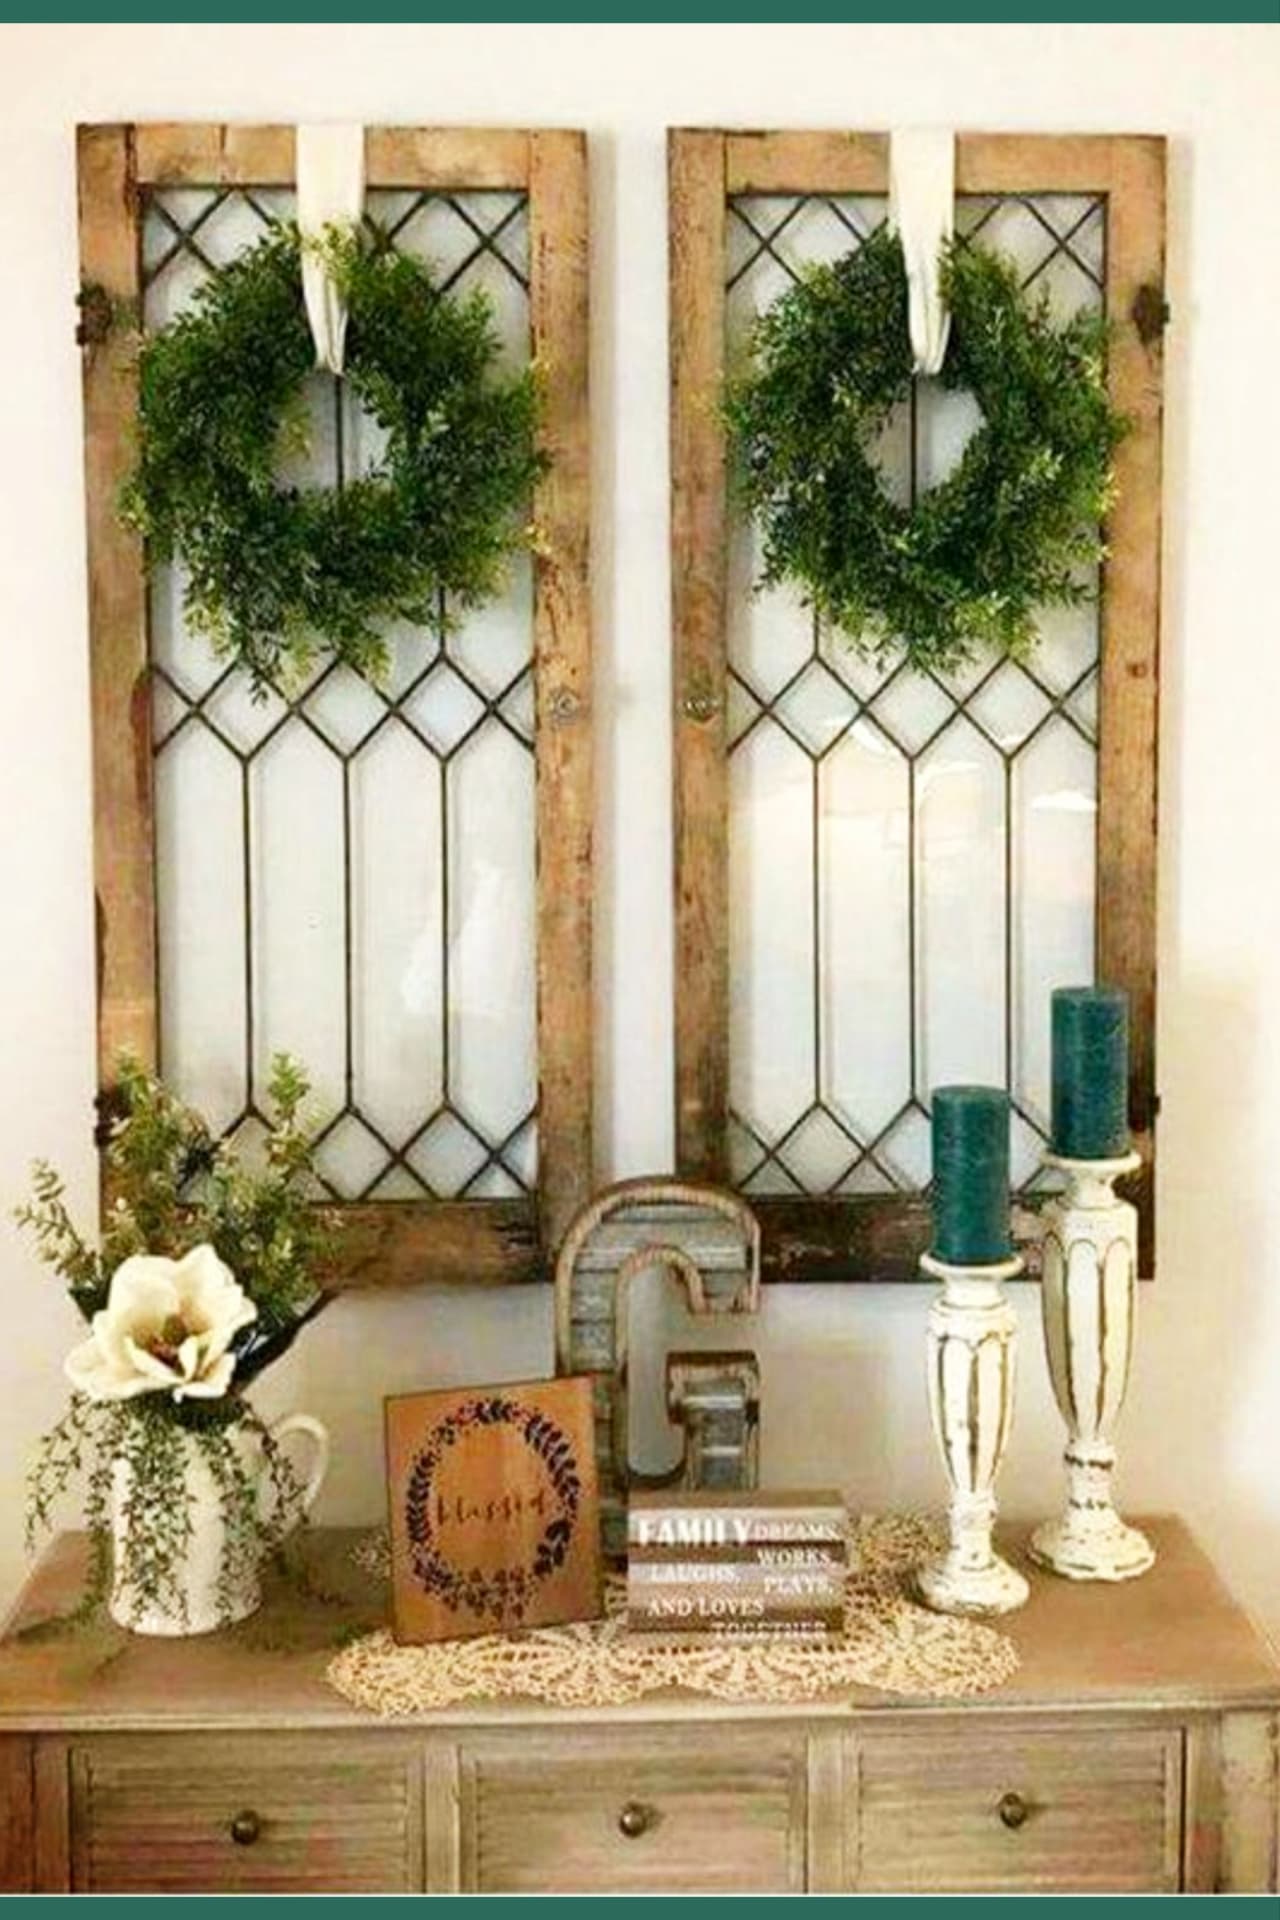 Entryway Wall Decor Ideas and Pictures of Small Foyer Decorating Ideas - Small Foyer or entryway hall decor idea for a farmhouse style entry hall - Small Foyer Wall Ideas - small foyer wall decorating ideas for very small entryways (like small apartment foyers) - see lots more small foyer ideas on a budget